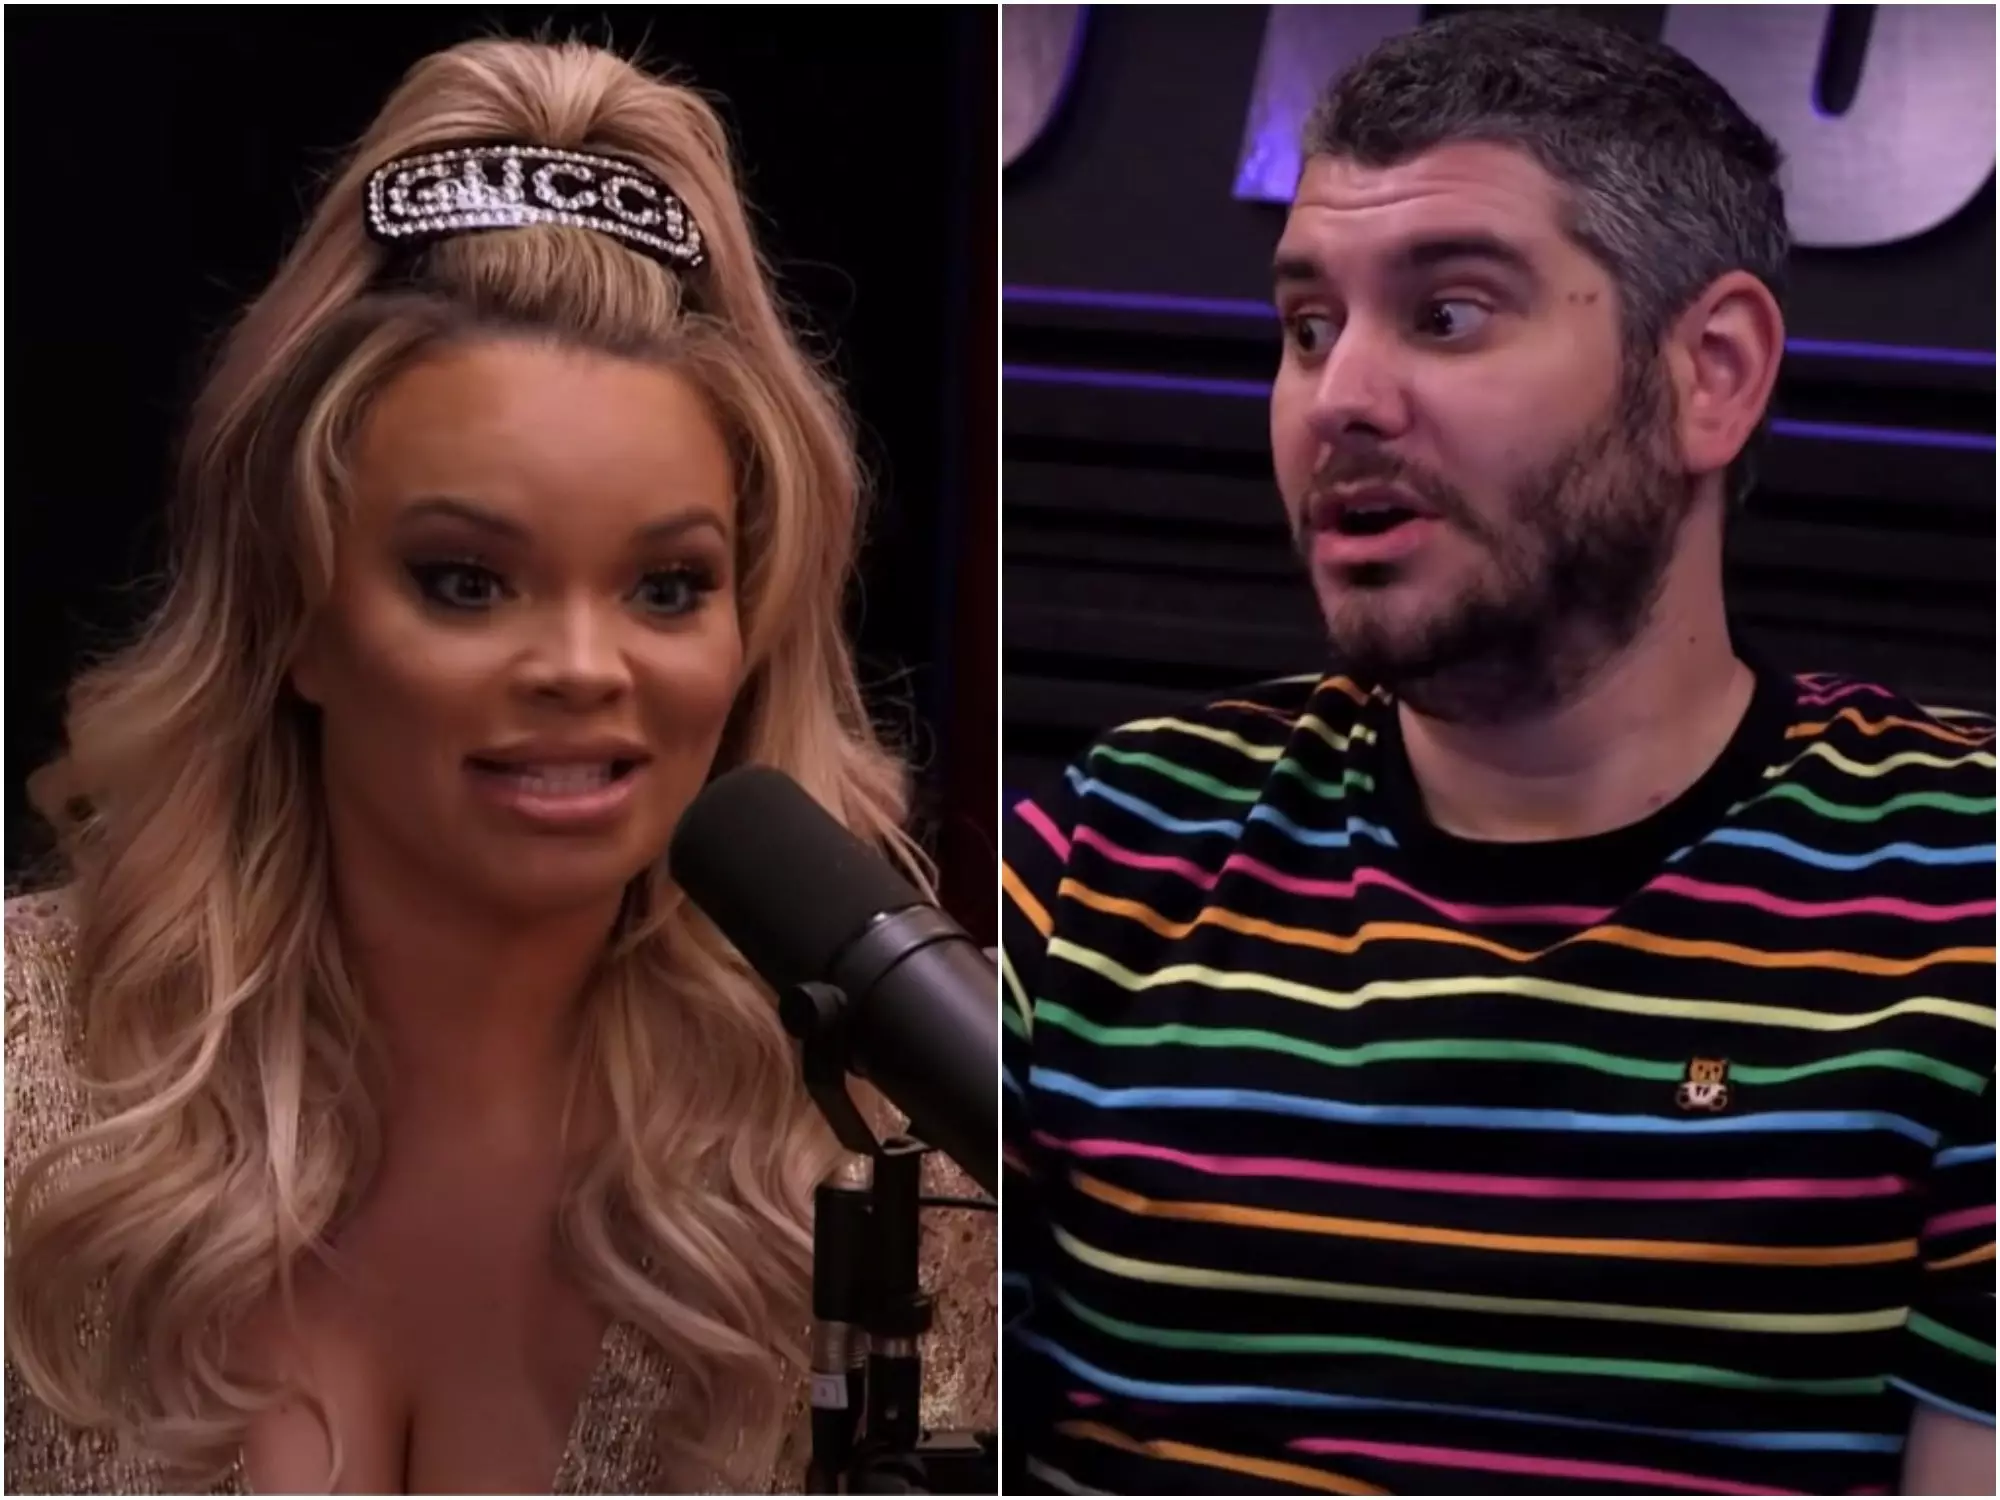 A timeline of all the drama between Trisha Paytas and H3H3 - Insider